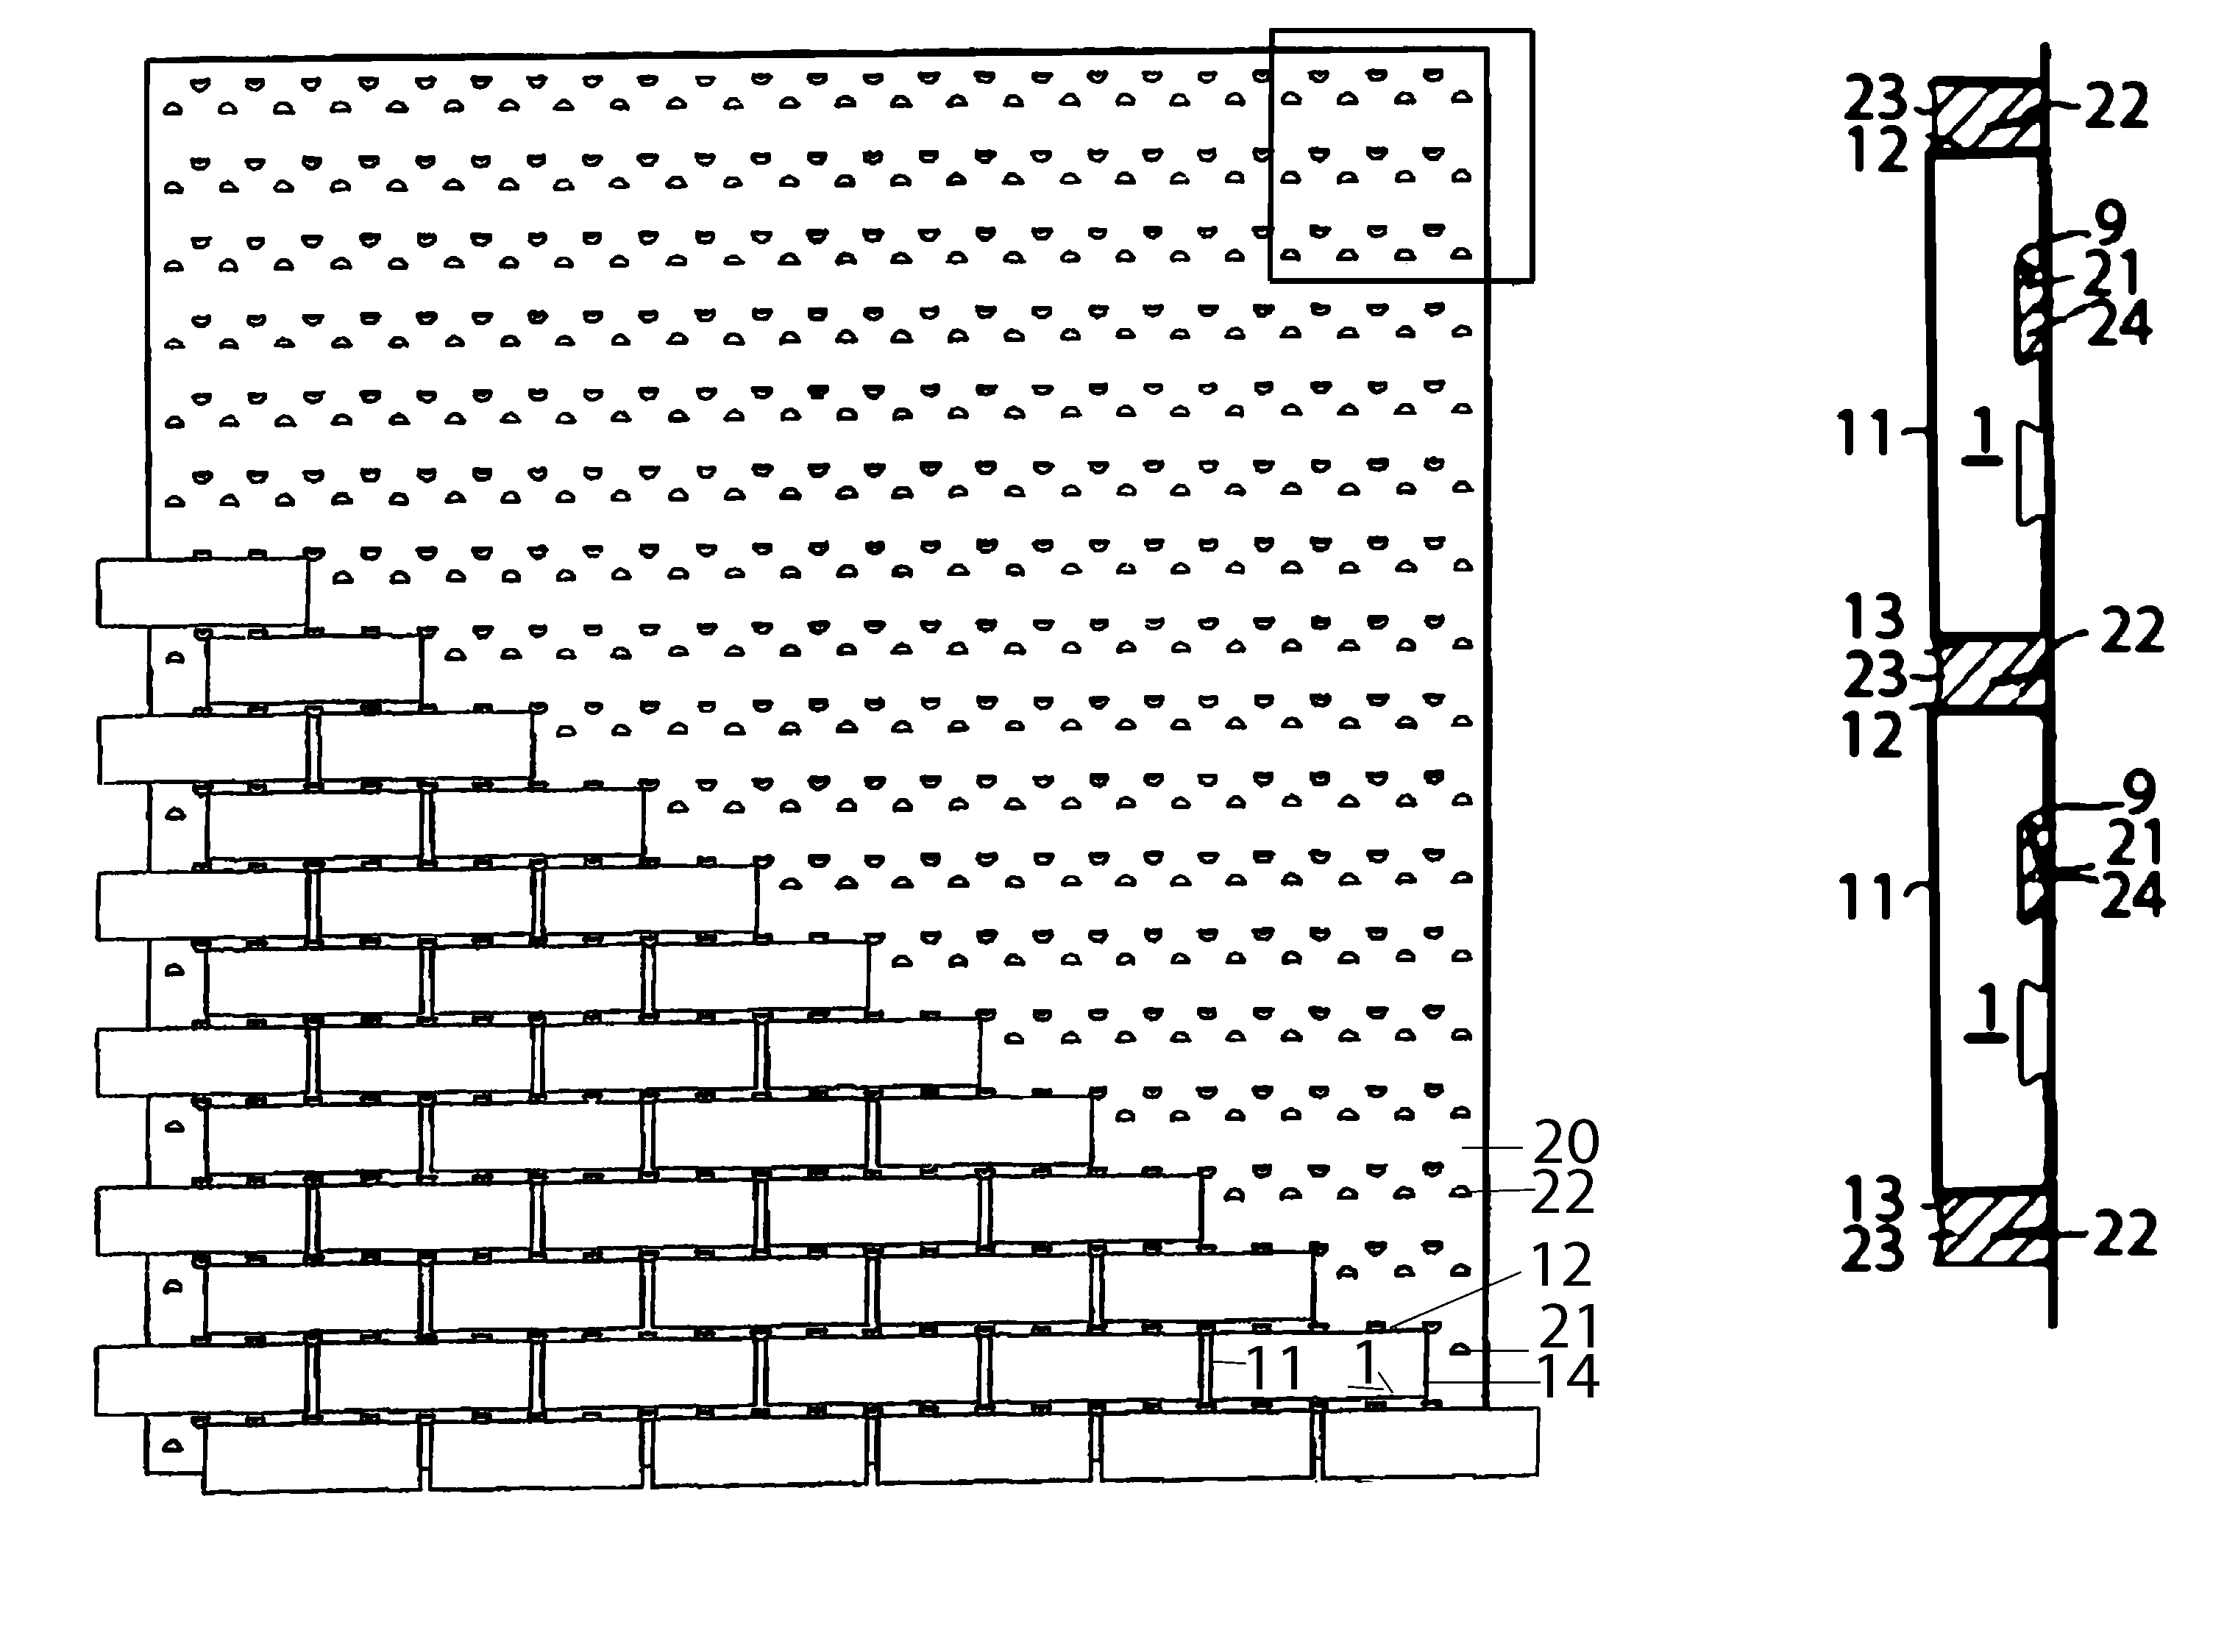 Support panel for thin brick